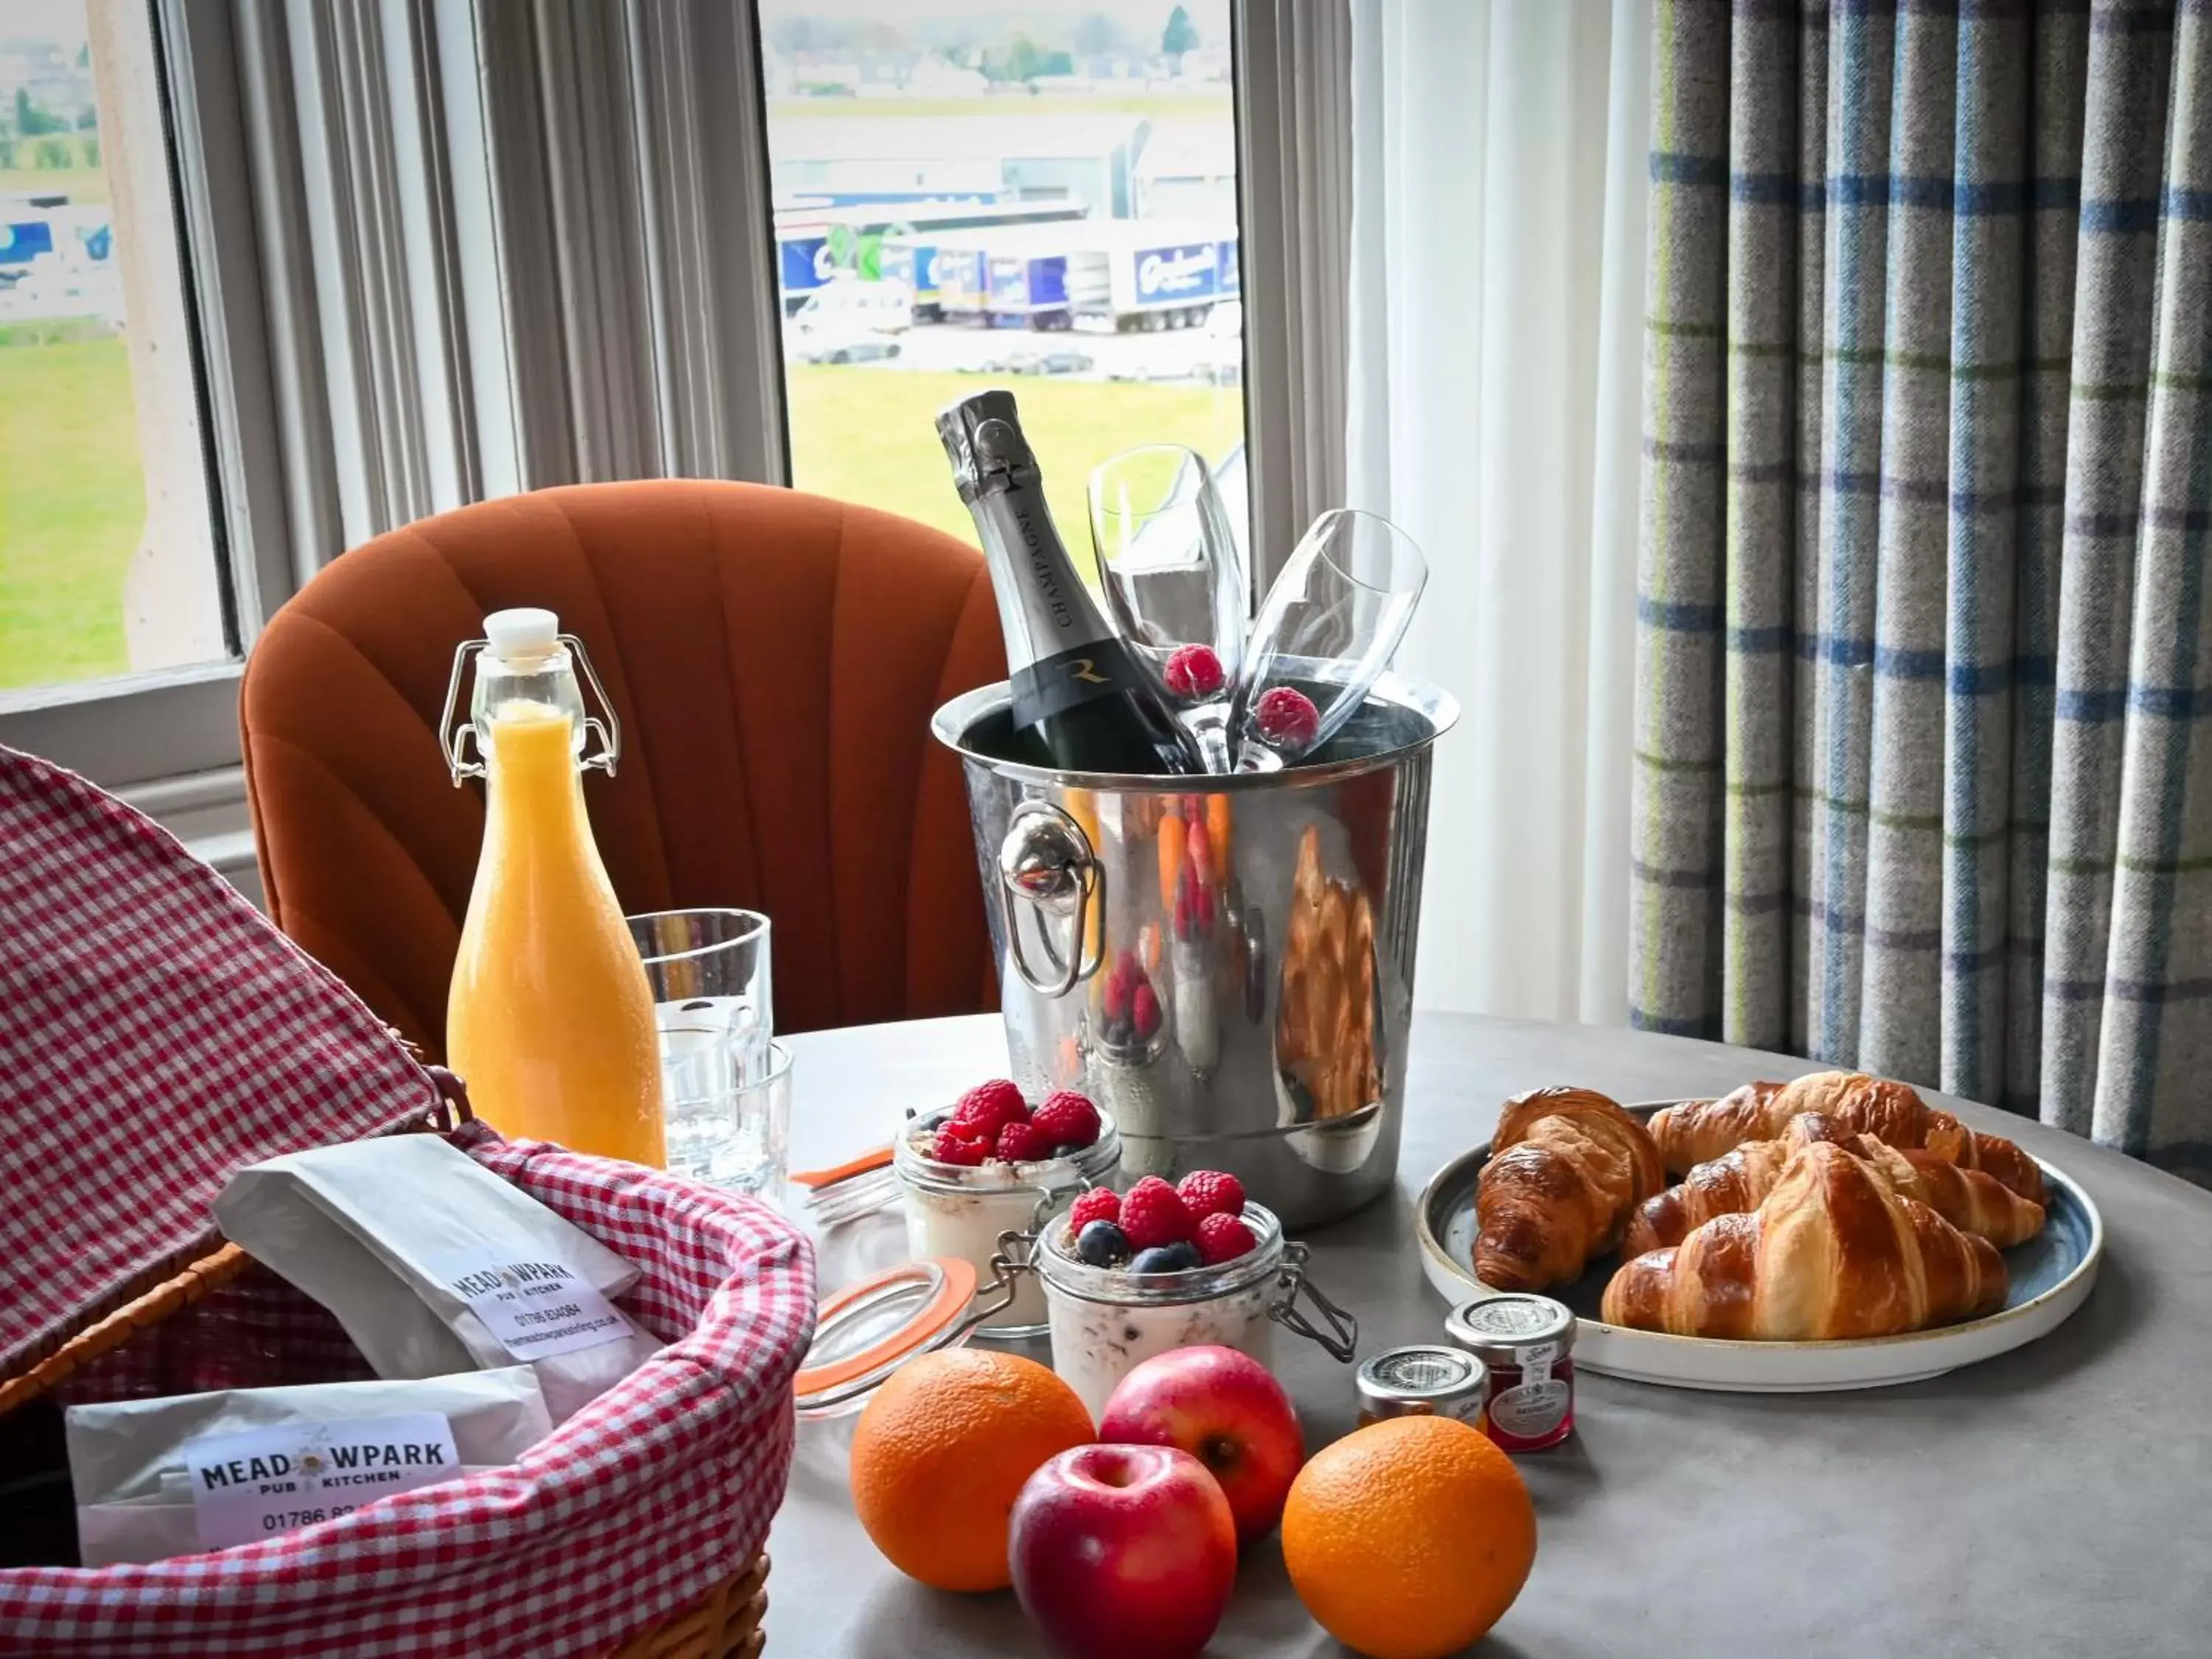 Breakfast in The Meadowpark Bar, Kitchen & Rooms